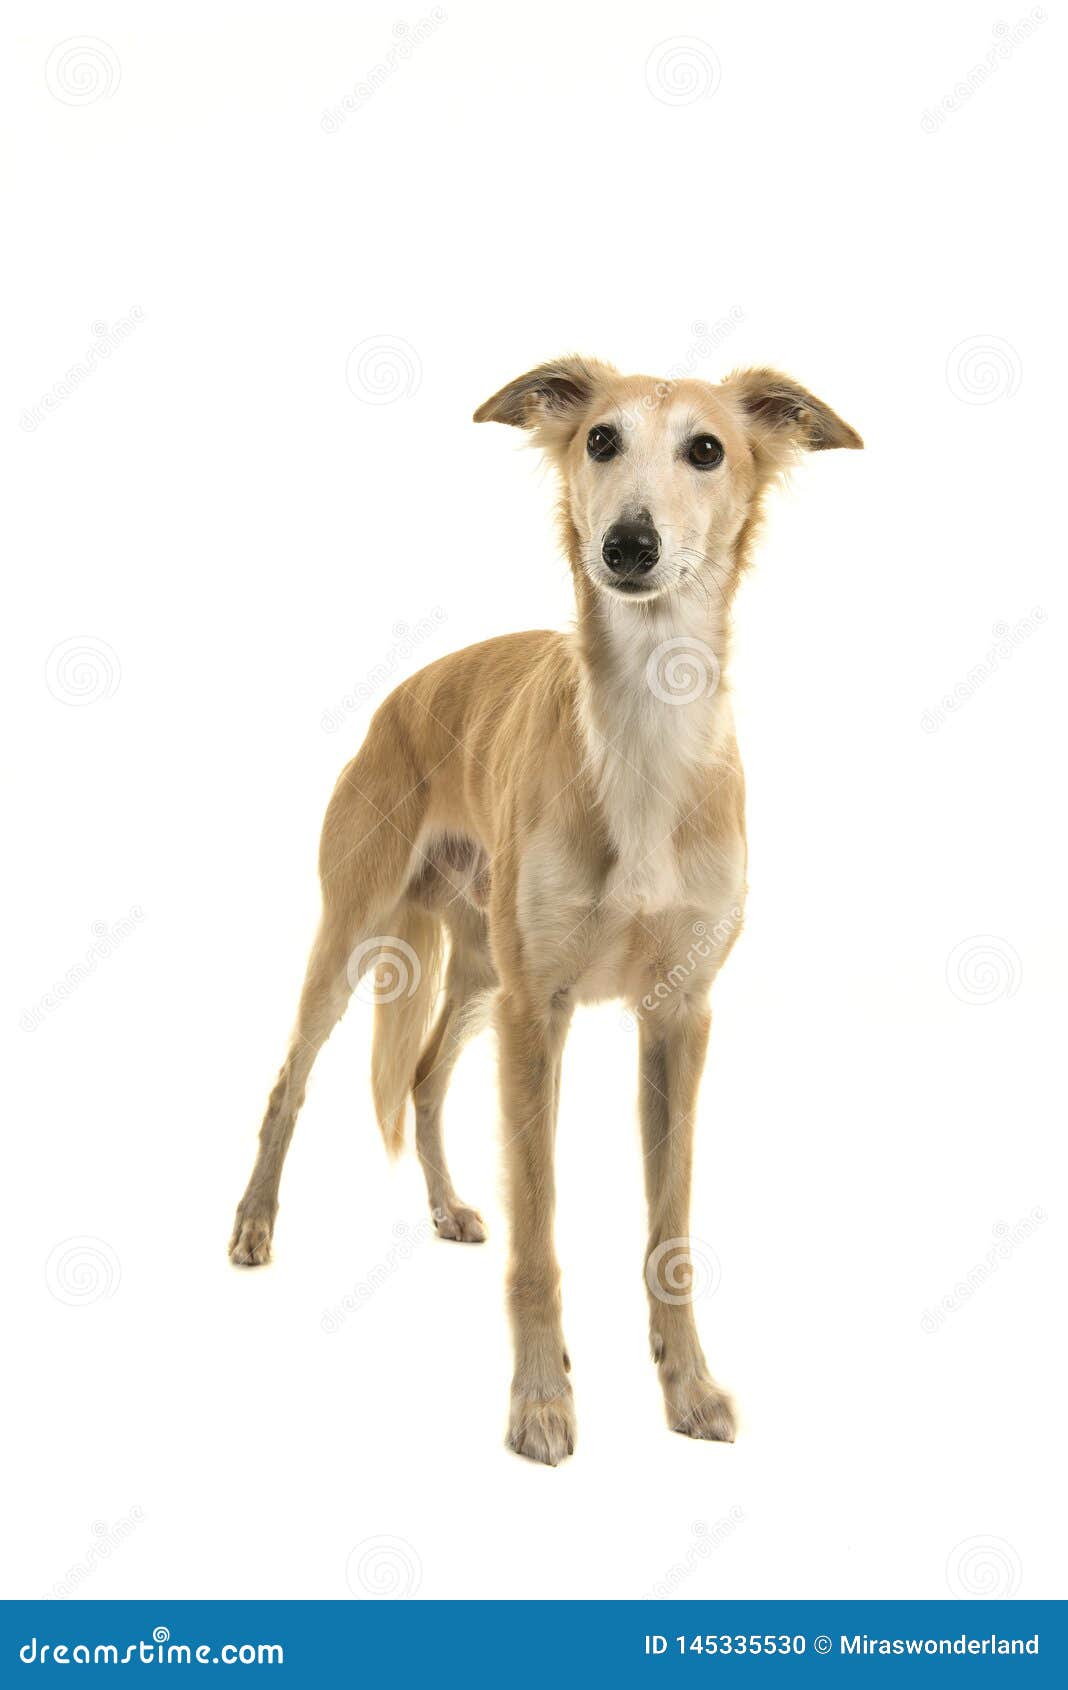 longhaired whippet dog standing on a white background